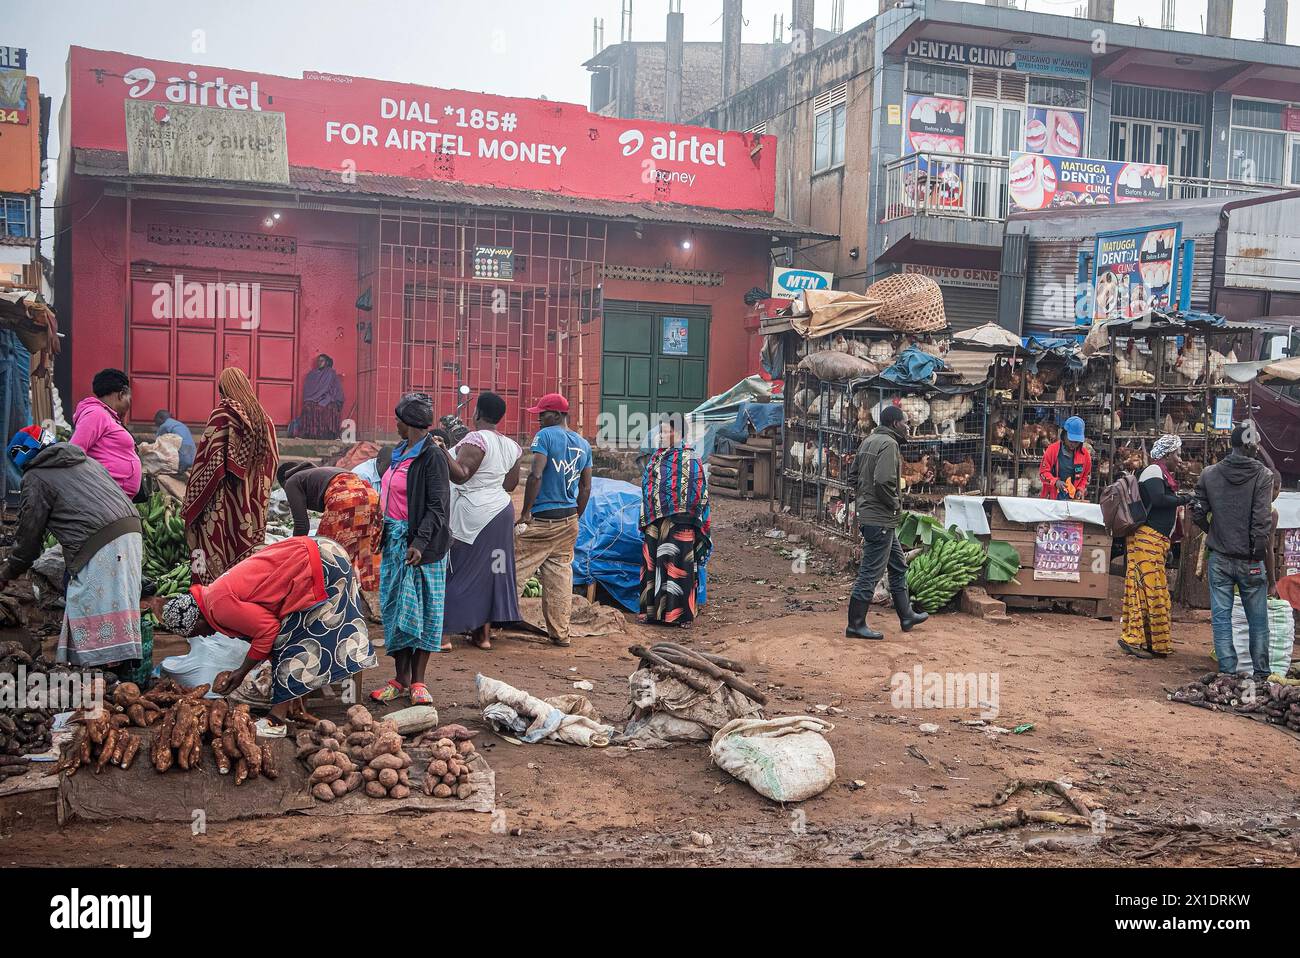 A lively street market in Kampala, Uganda, with brightly dressed vendors selling fruits, vegetables, poultry and more. A dental clinic and a telephone Stock Photo